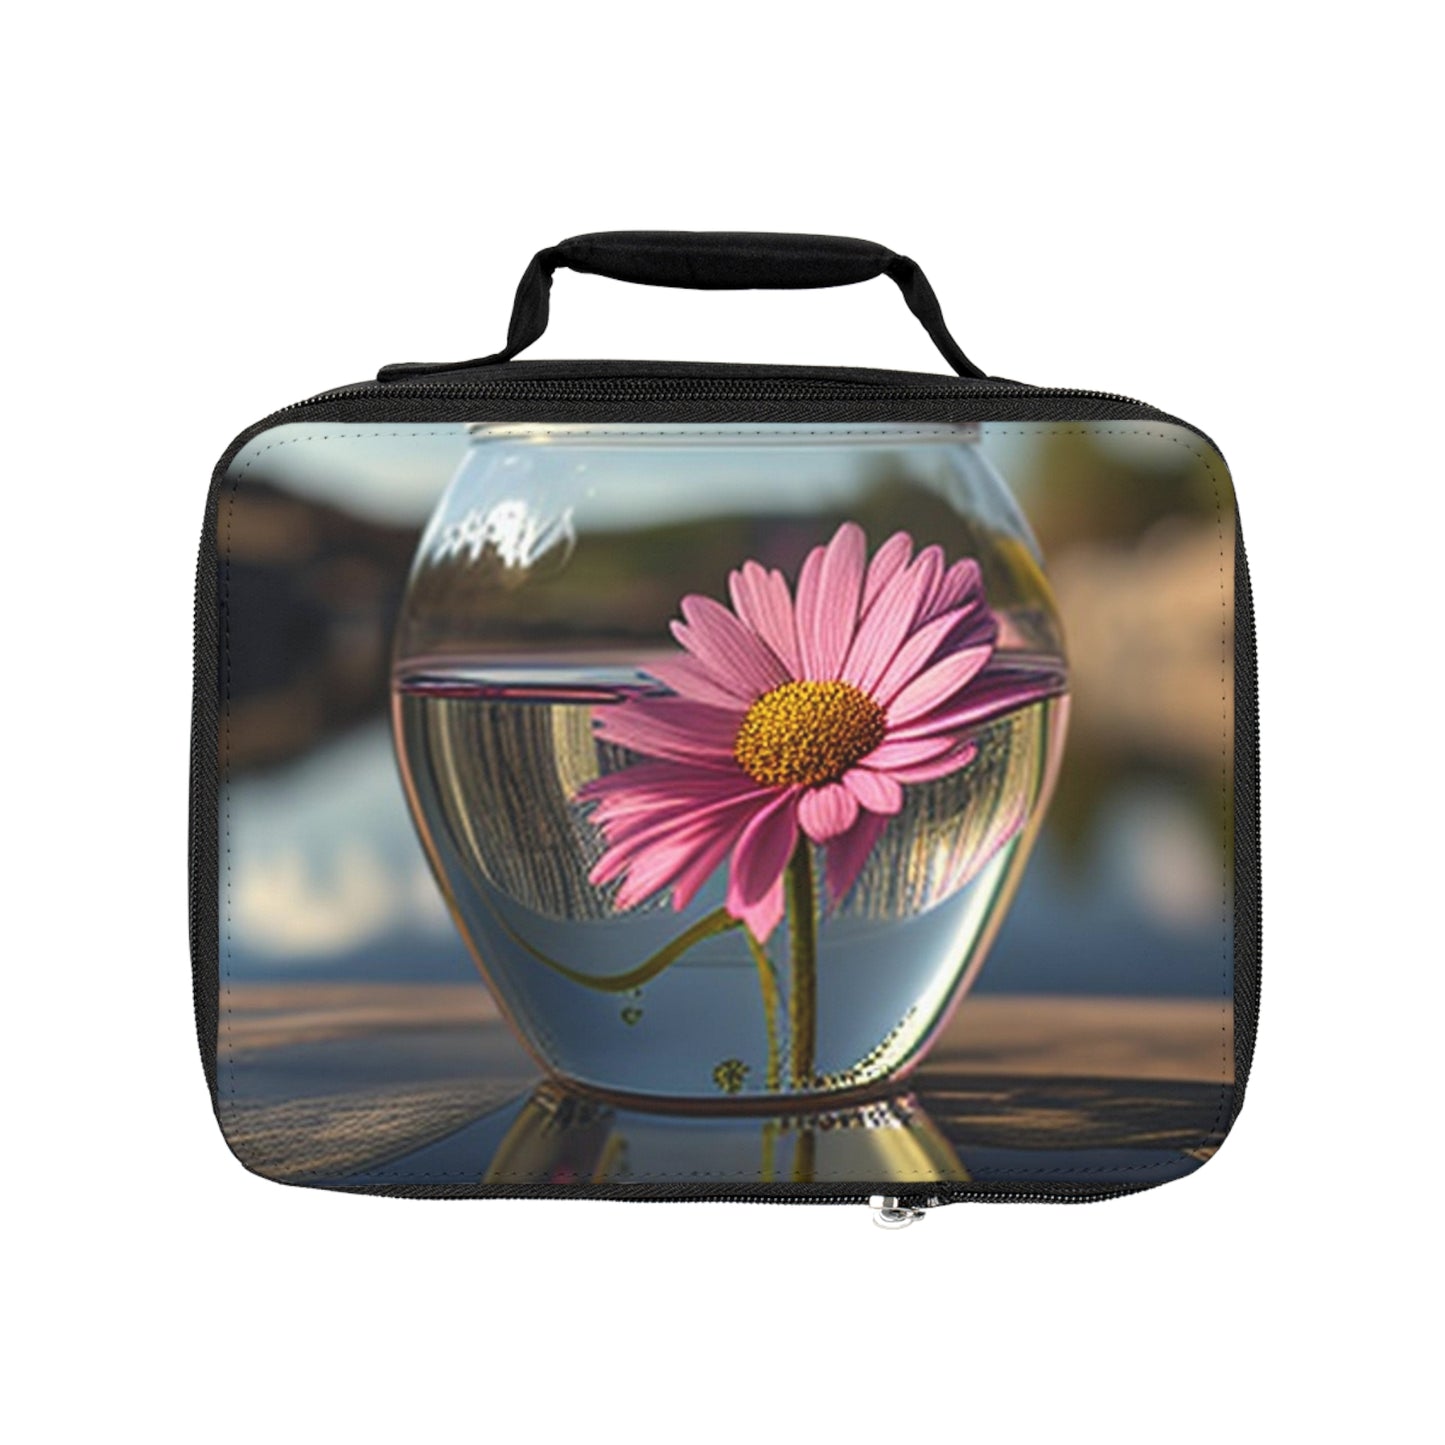 Lunch Bag Pink Daisy 3